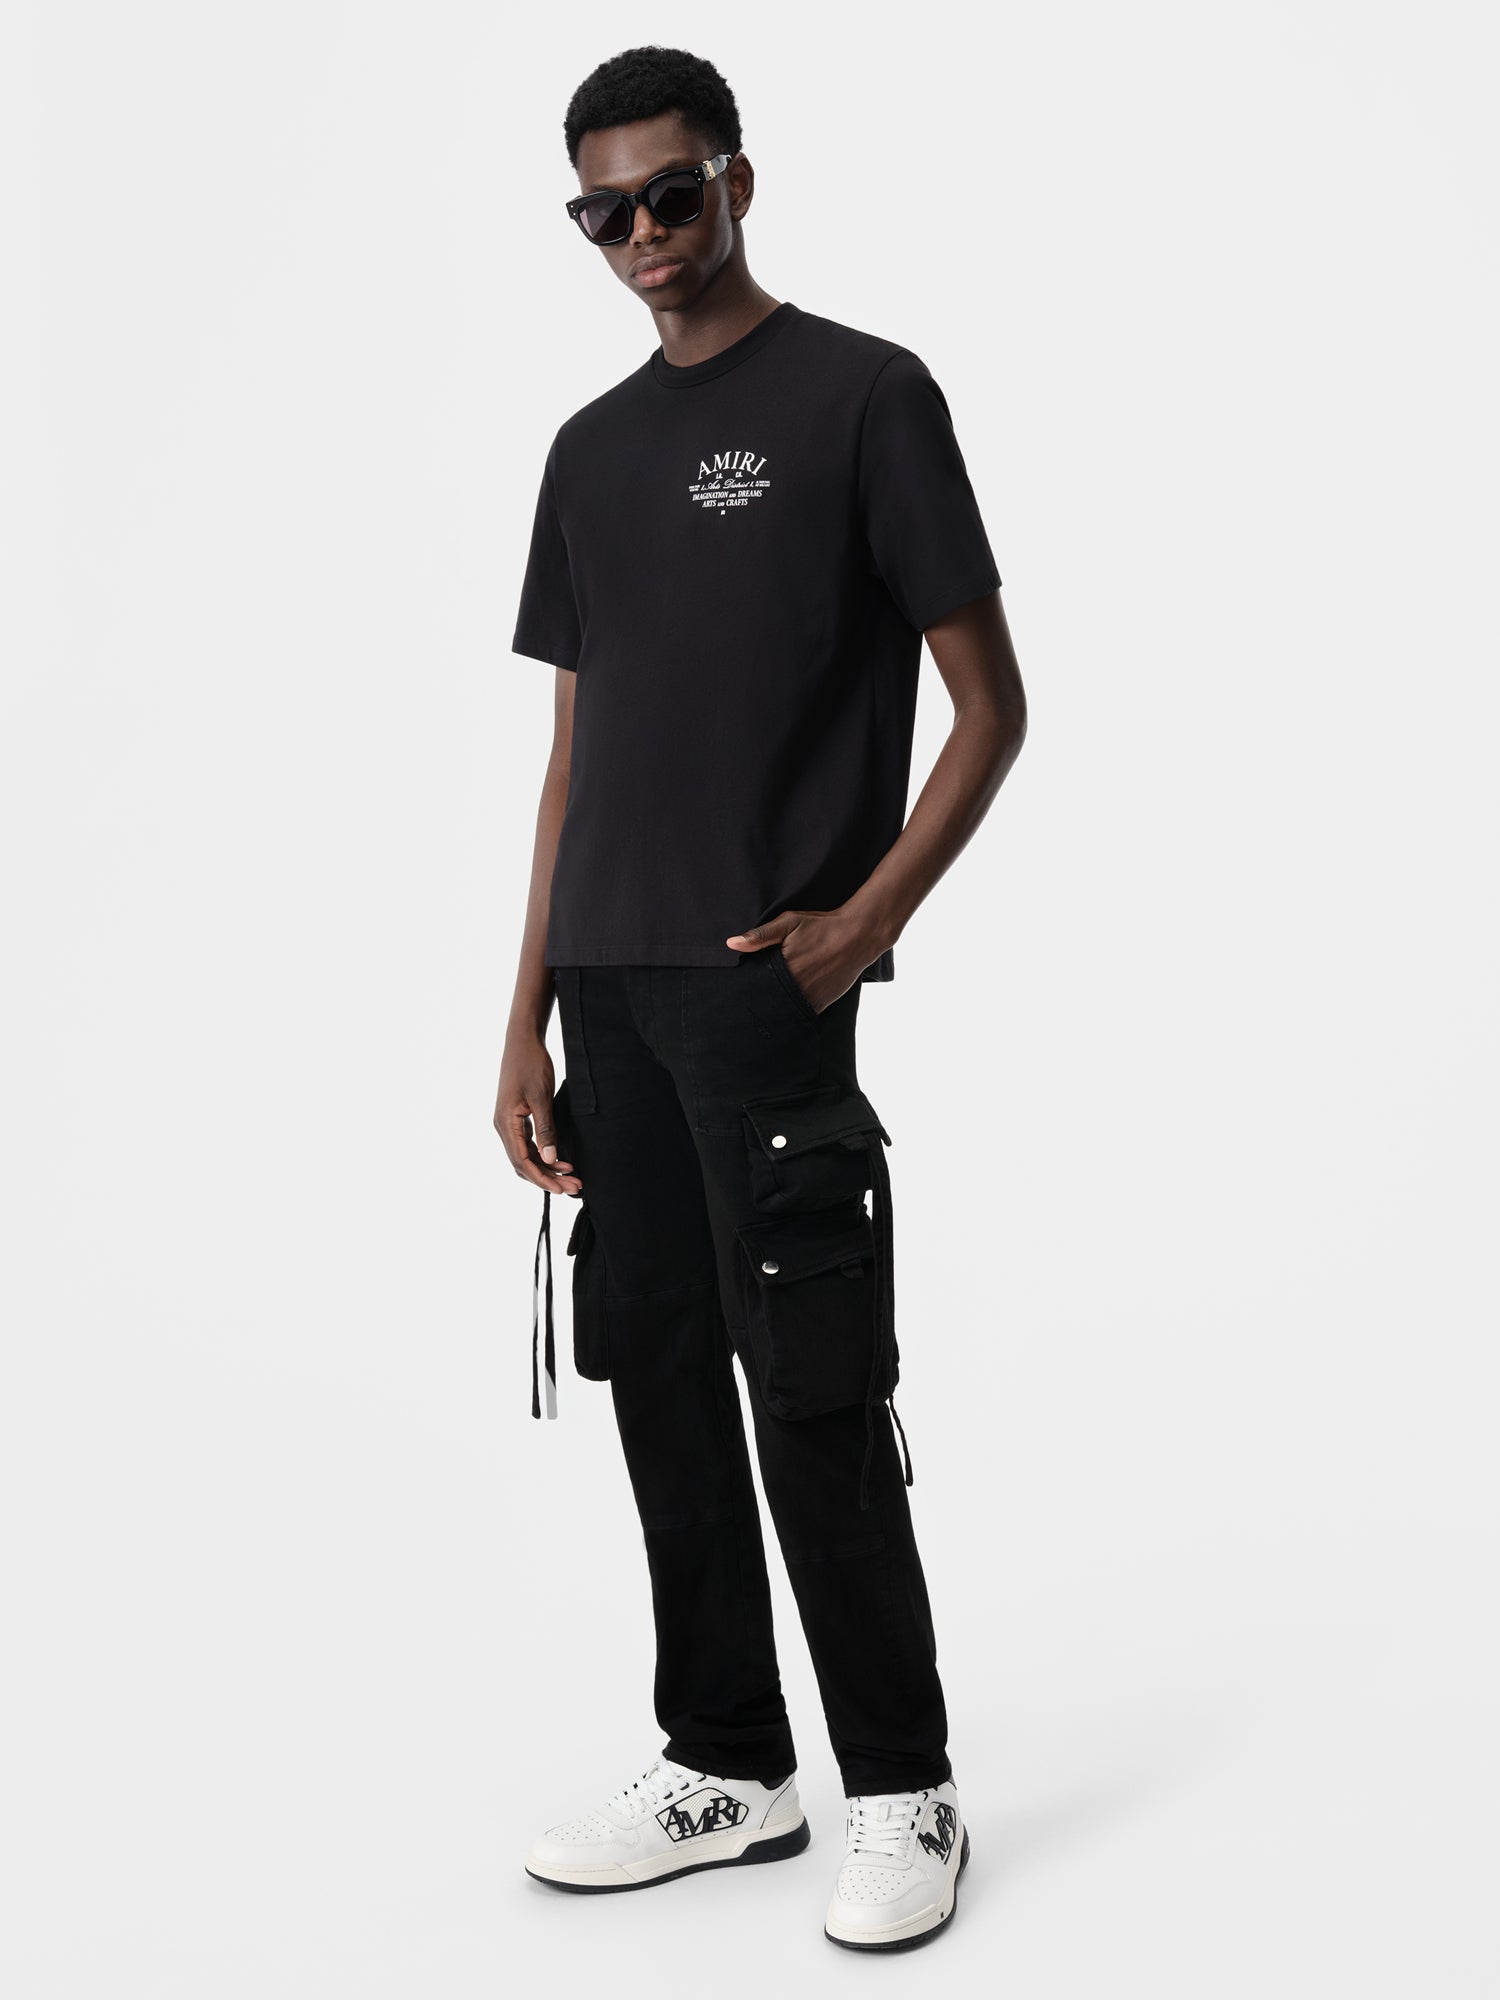 Product TACTICAL CARGO - Black featured image